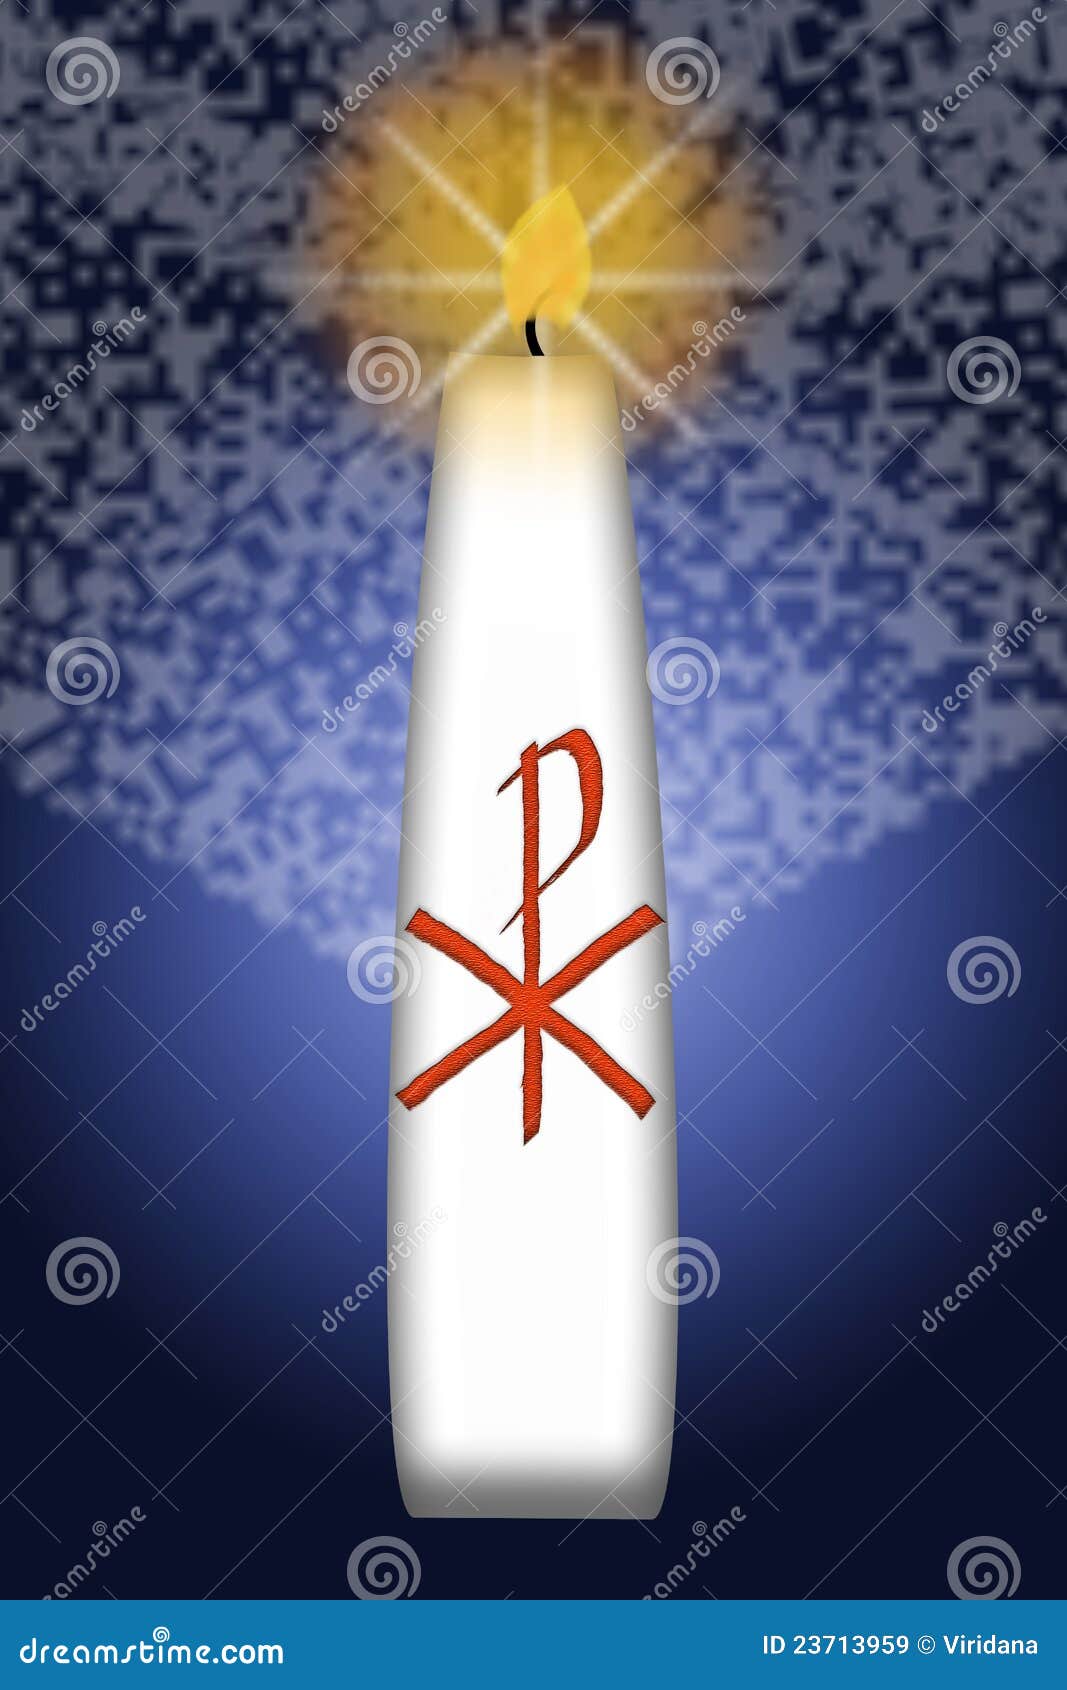 Easter Candle With Christ Monogram Royalty Free Stock Images - Image